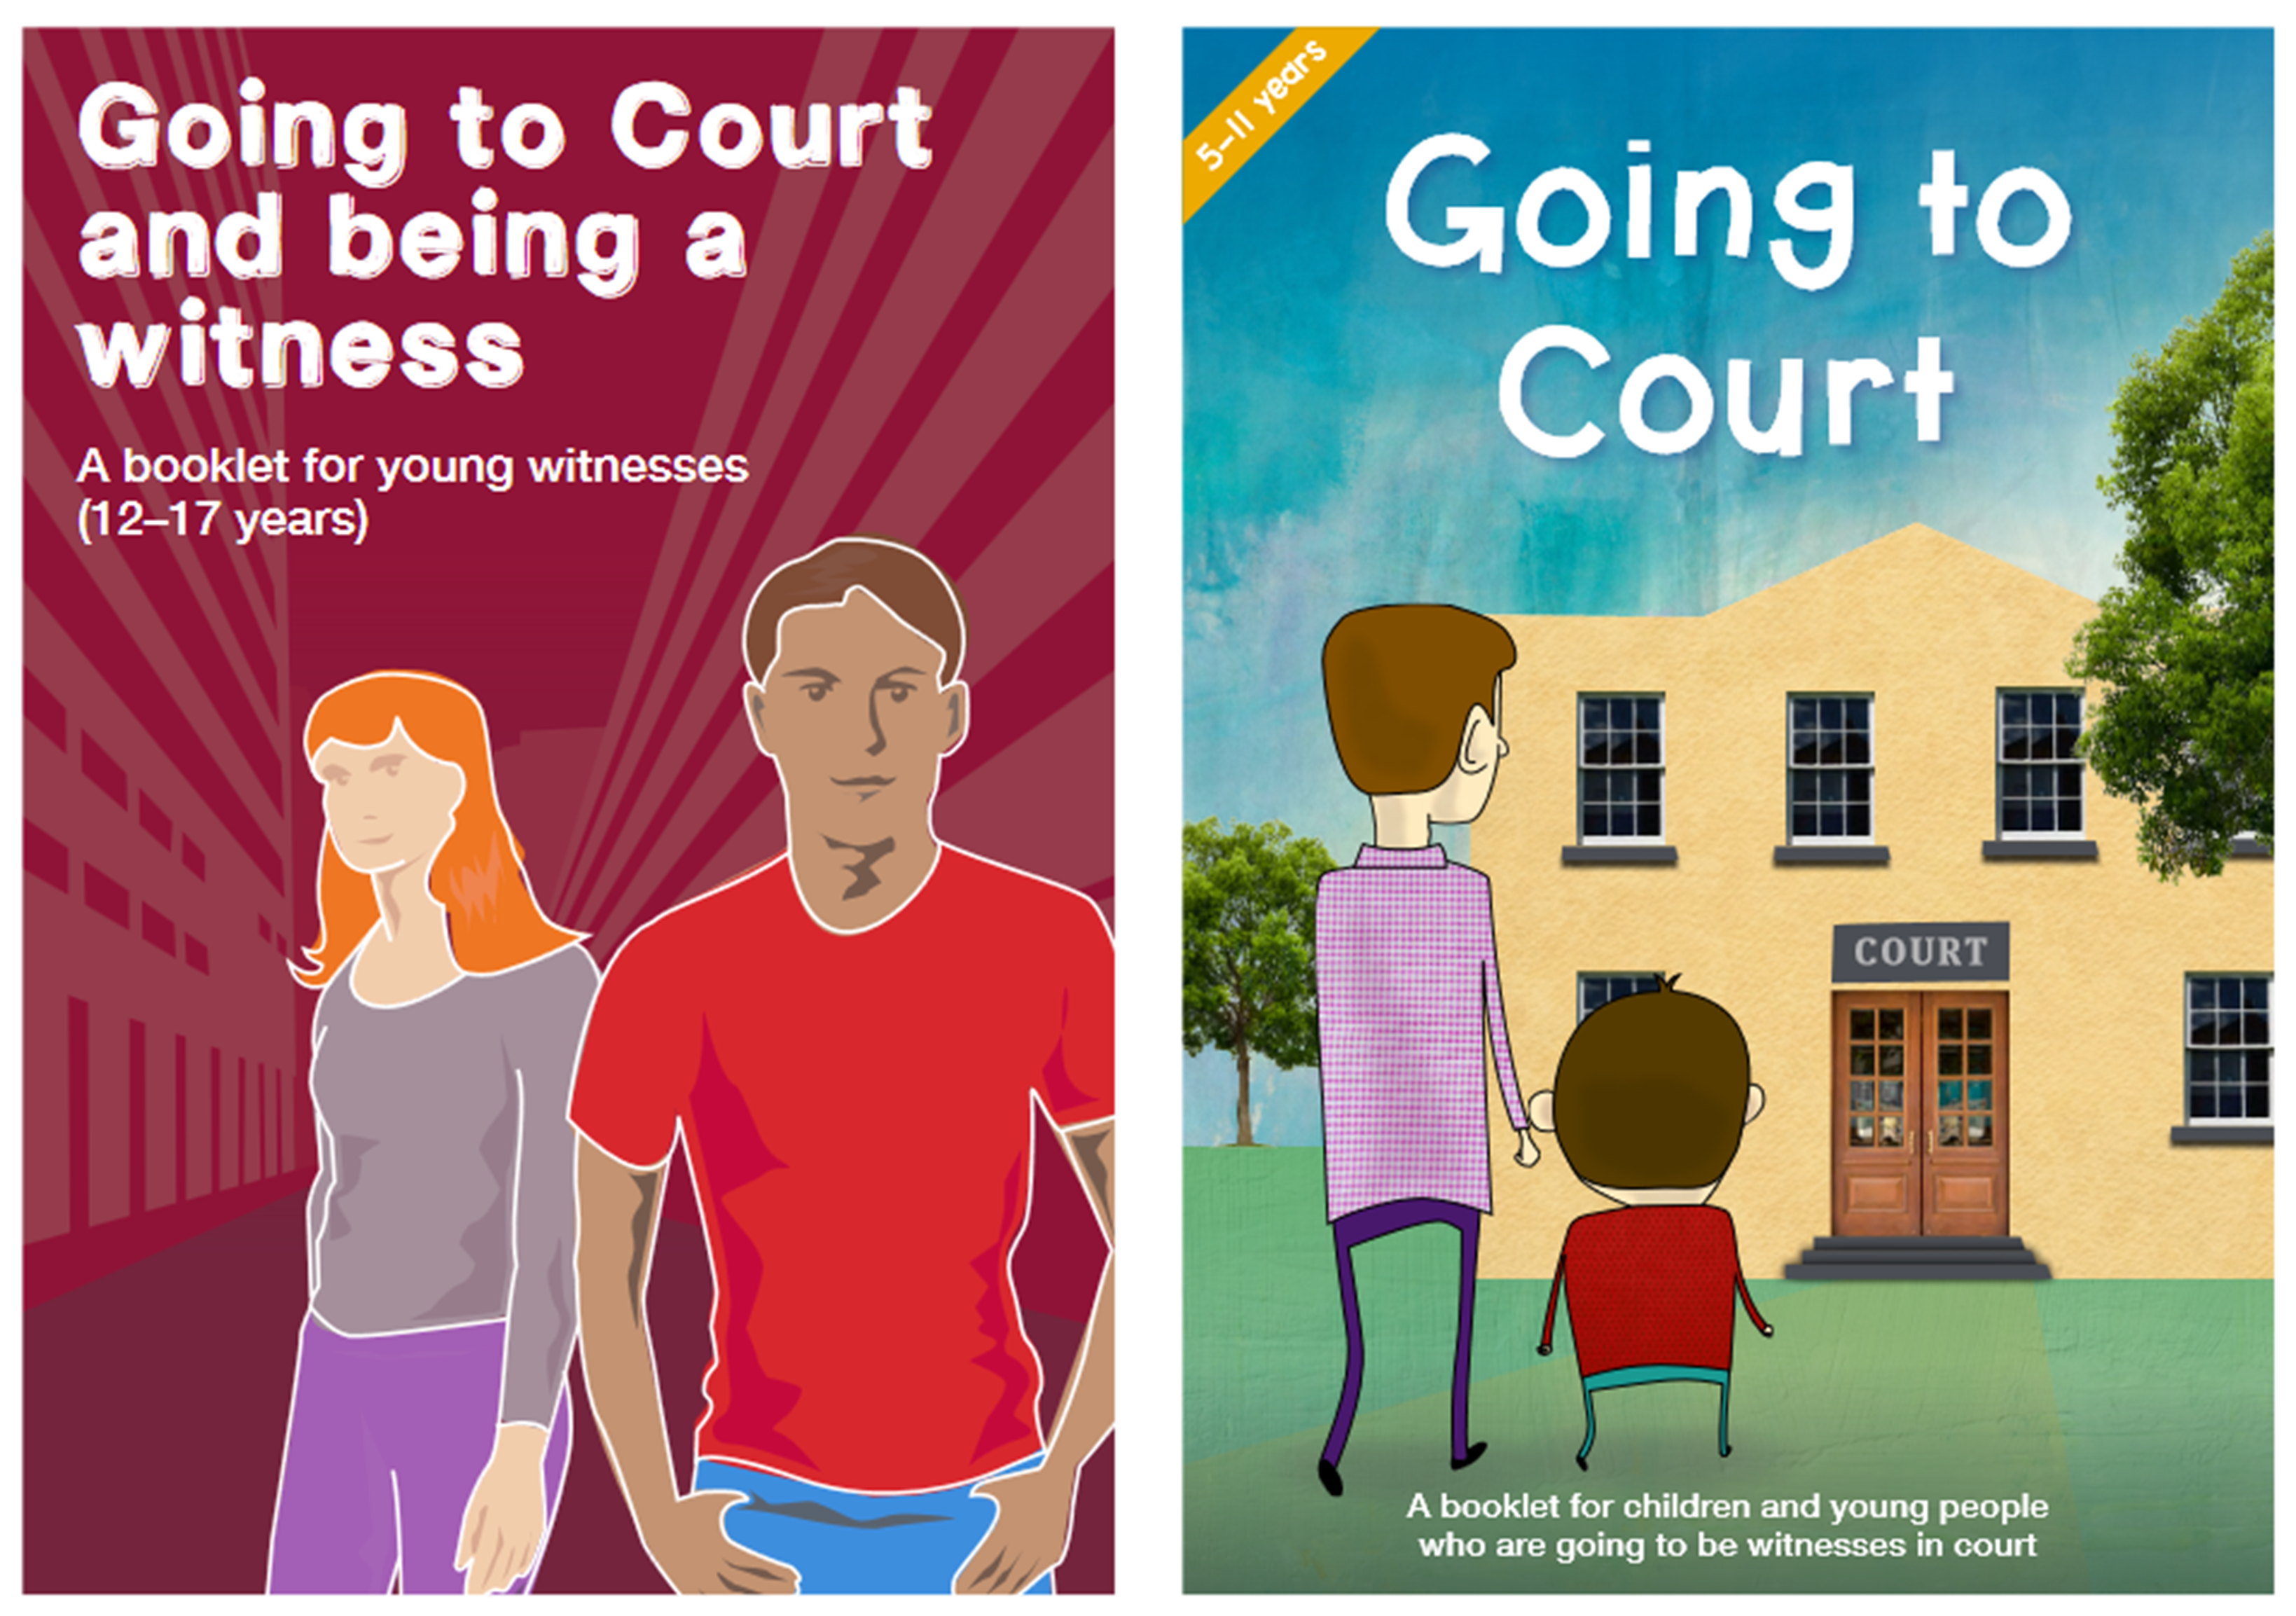 Image shows front covers of both Going to Court books (one for 12-17 year olds, the other for 5-11 year olds).